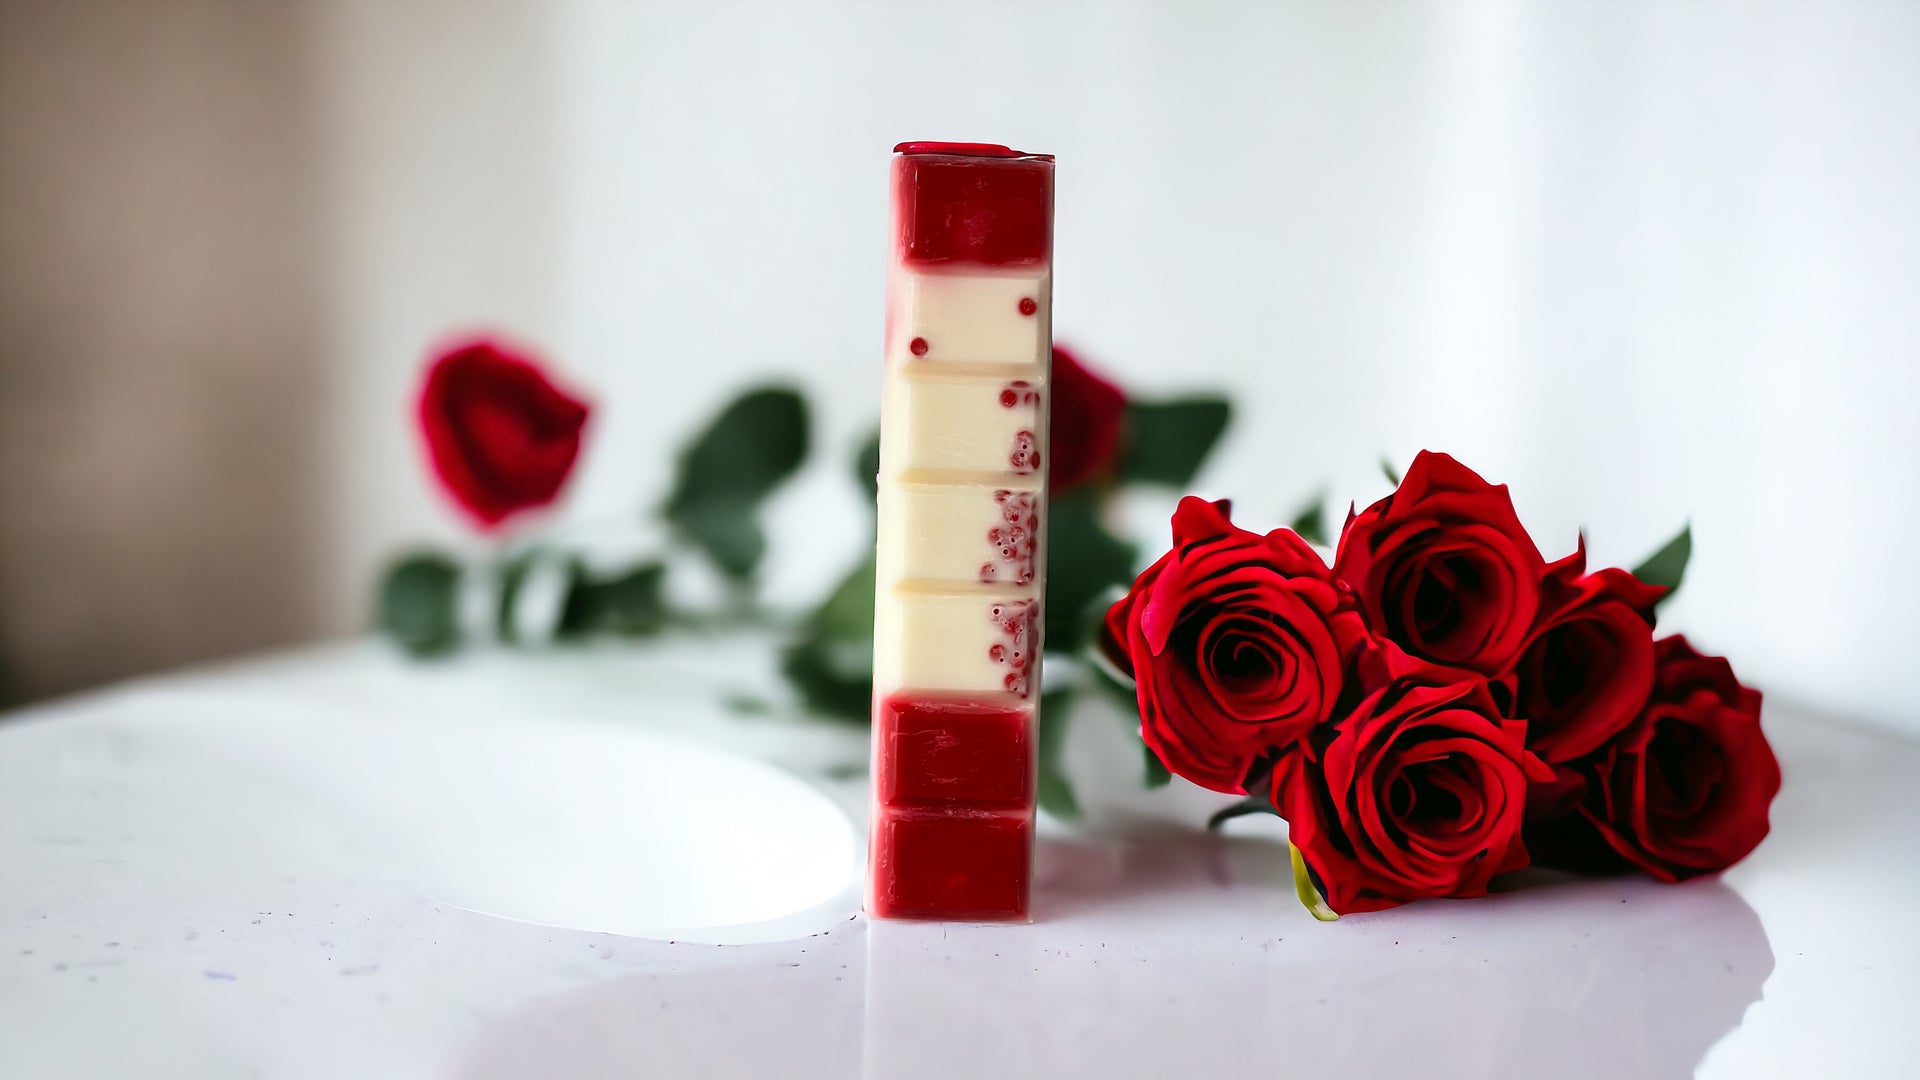 Red and white wax melt snap bar with red roses lying next to the wax melt on table.